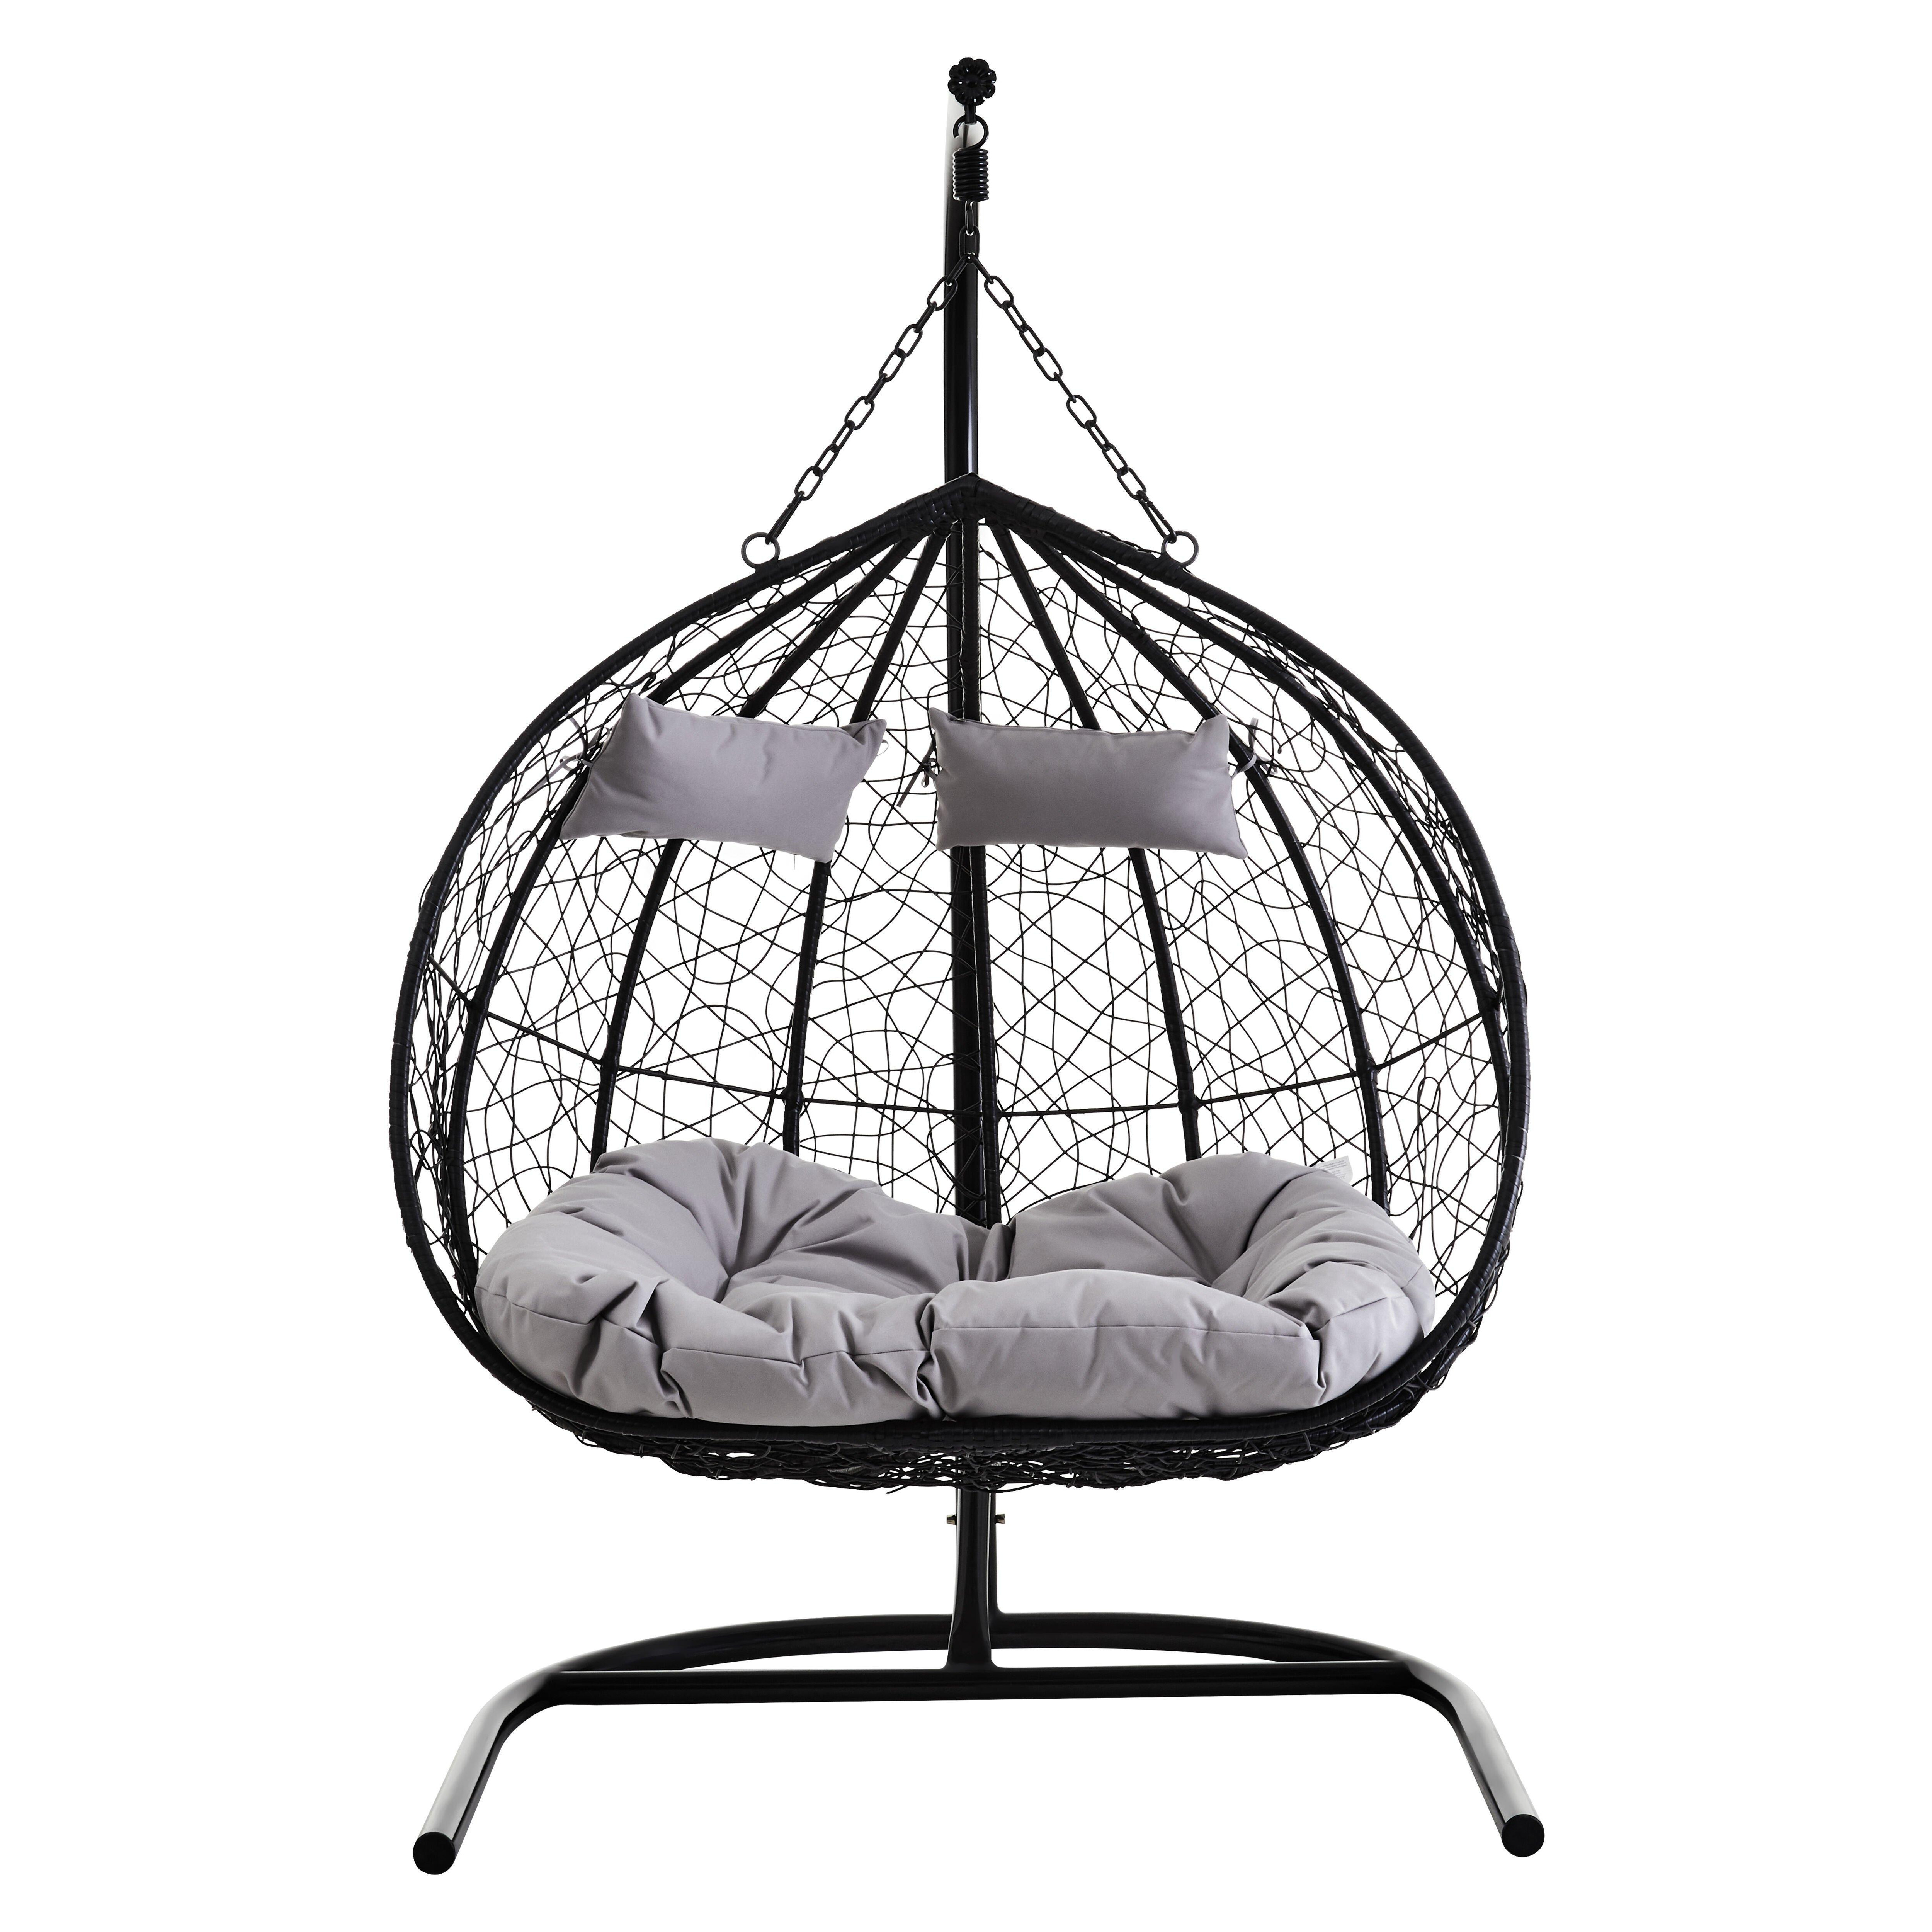 Goa Double Black Hanging Chair - image 1